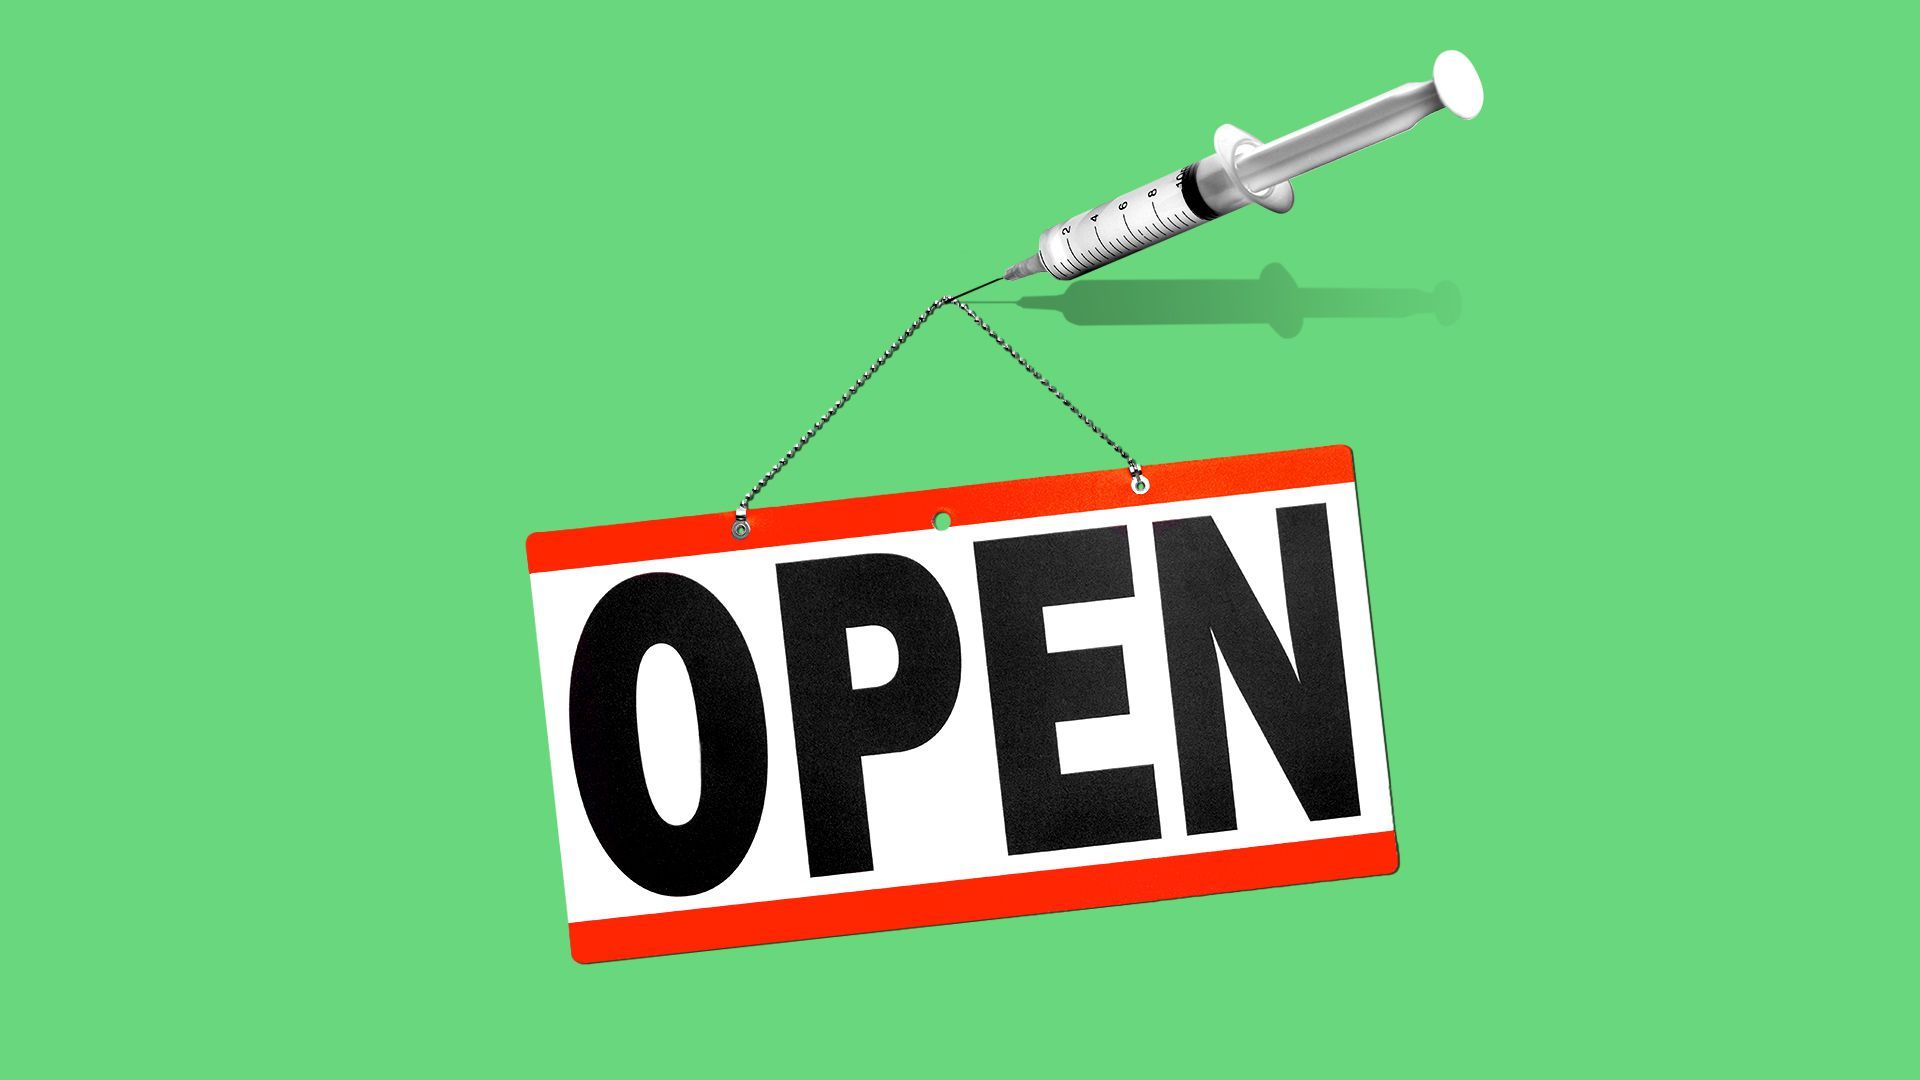 Illustration of an open sign being held up by a syringe stuck in the background. 